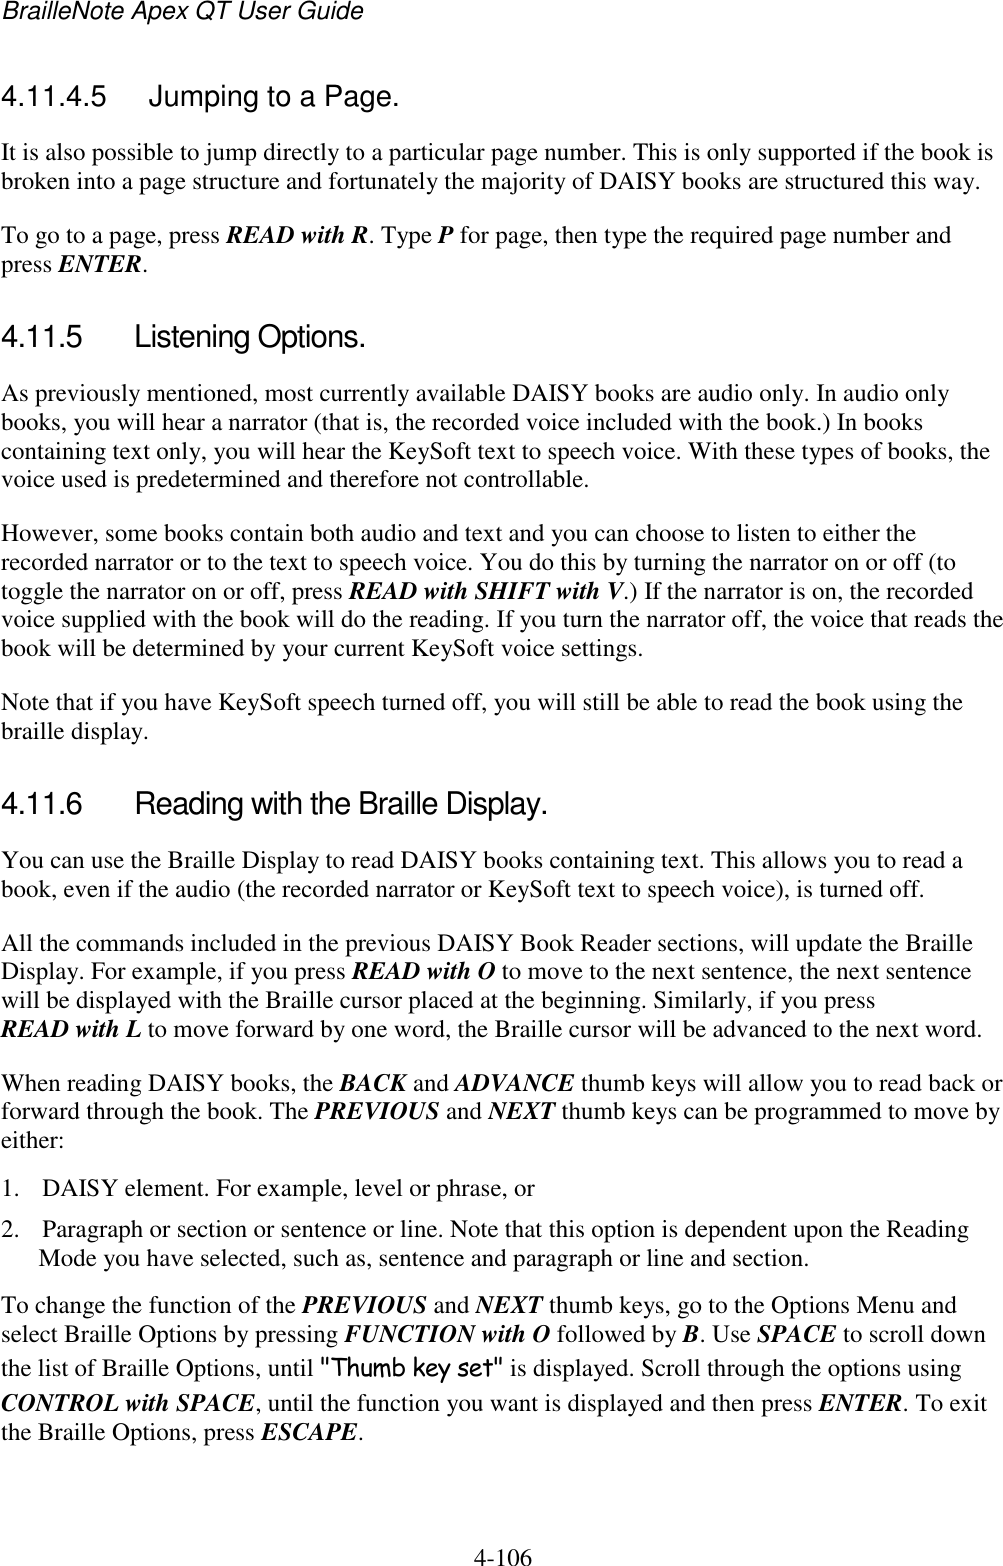 BrailleNote Apex QT User Guide  4-106   4.11.4.5  Jumping to a Page. It is also possible to jump directly to a particular page number. This is only supported if the book is broken into a page structure and fortunately the majority of DAISY books are structured this way.  To go to a page, press READ with R. Type P for page, then type the required page number and press ENTER.  4.11.5  Listening Options. As previously mentioned, most currently available DAISY books are audio only. In audio only books, you will hear a narrator (that is, the recorded voice included with the book.) In books containing text only, you will hear the KeySoft text to speech voice. With these types of books, the voice used is predetermined and therefore not controllable.  However, some books contain both audio and text and you can choose to listen to either the recorded narrator or to the text to speech voice. You do this by turning the narrator on or off (to toggle the narrator on or off, press READ with SHIFT with V.) If the narrator is on, the recorded voice supplied with the book will do the reading. If you turn the narrator off, the voice that reads the book will be determined by your current KeySoft voice settings.  Note that if you have KeySoft speech turned off, you will still be able to read the book using the braille display.  4.11.6  Reading with the Braille Display. You can use the Braille Display to read DAISY books containing text. This allows you to read a book, even if the audio (the recorded narrator or KeySoft text to speech voice), is turned off. All the commands included in the previous DAISY Book Reader sections, will update the Braille Display. For example, if you press READ with O to move to the next sentence, the next sentence will be displayed with the Braille cursor placed at the beginning. Similarly, if you press READ with L to move forward by one word, the Braille cursor will be advanced to the next word. When reading DAISY books, the BACK and ADVANCE thumb keys will allow you to read back or forward through the book. The PREVIOUS and NEXT thumb keys can be programmed to move by either: 1. DAISY element. For example, level or phrase, or 2. Paragraph or section or sentence or line. Note that this option is dependent upon the Reading Mode you have selected, such as, sentence and paragraph or line and section. To change the function of the PREVIOUS and NEXT thumb keys, go to the Options Menu and select Braille Options by pressing FUNCTION with O followed by B. Use SPACE to scroll down the list of Braille Options, until &quot;Thumb key set&quot; is displayed. Scroll through the options using CONTROL with SPACE, until the function you want is displayed and then press ENTER. To exit the Braille Options, press ESCAPE.  